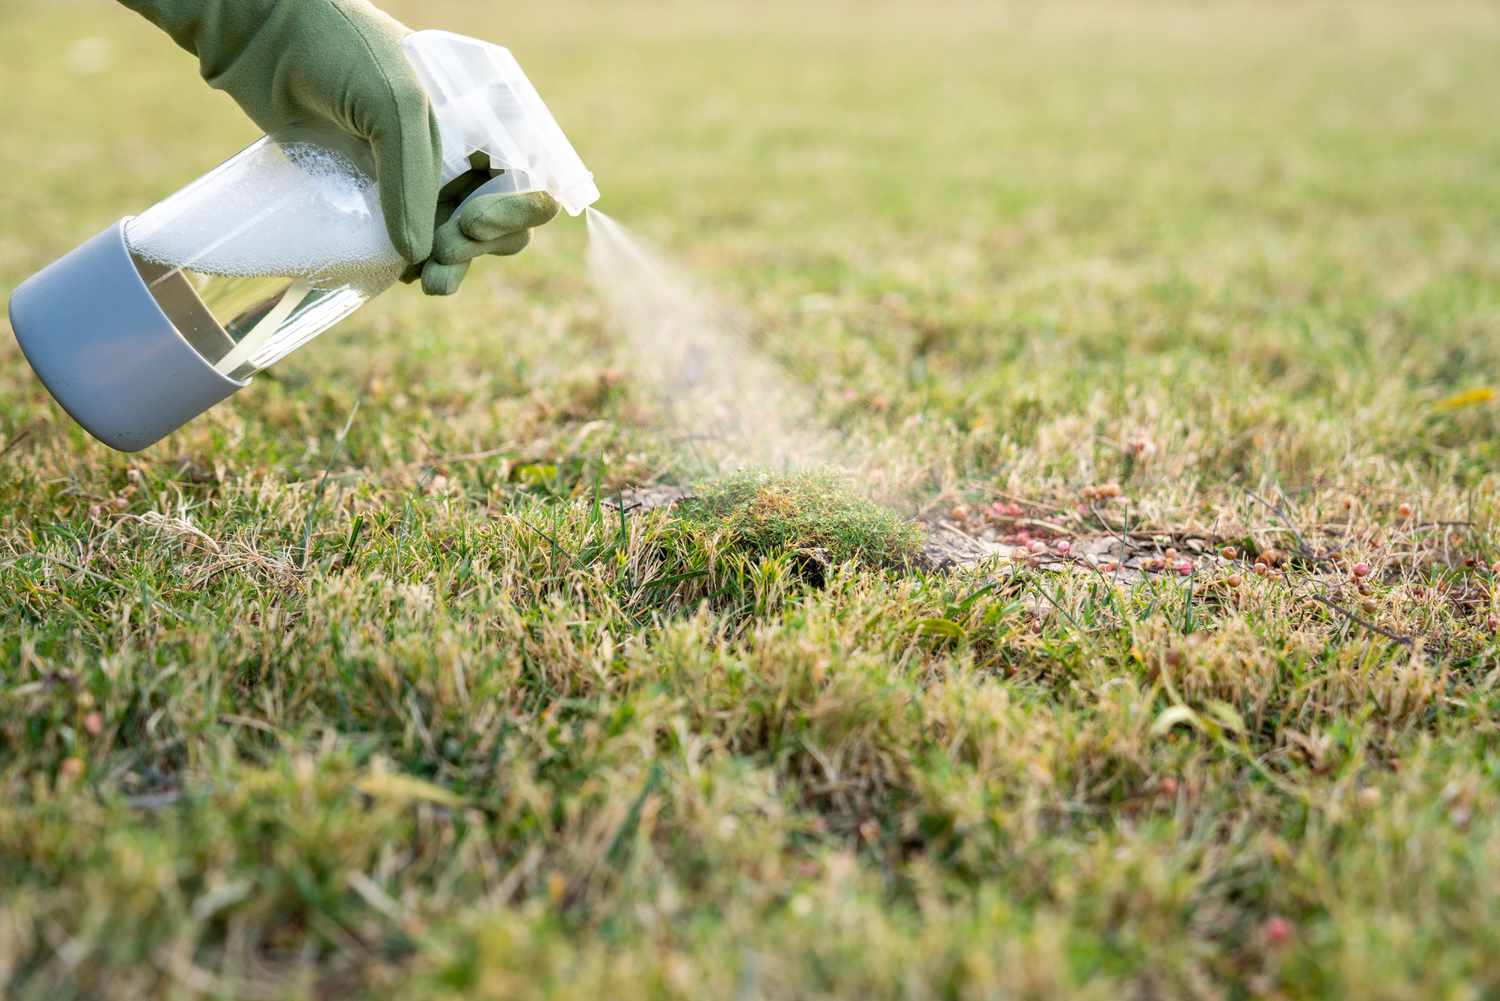 How To Kill Grass Safely